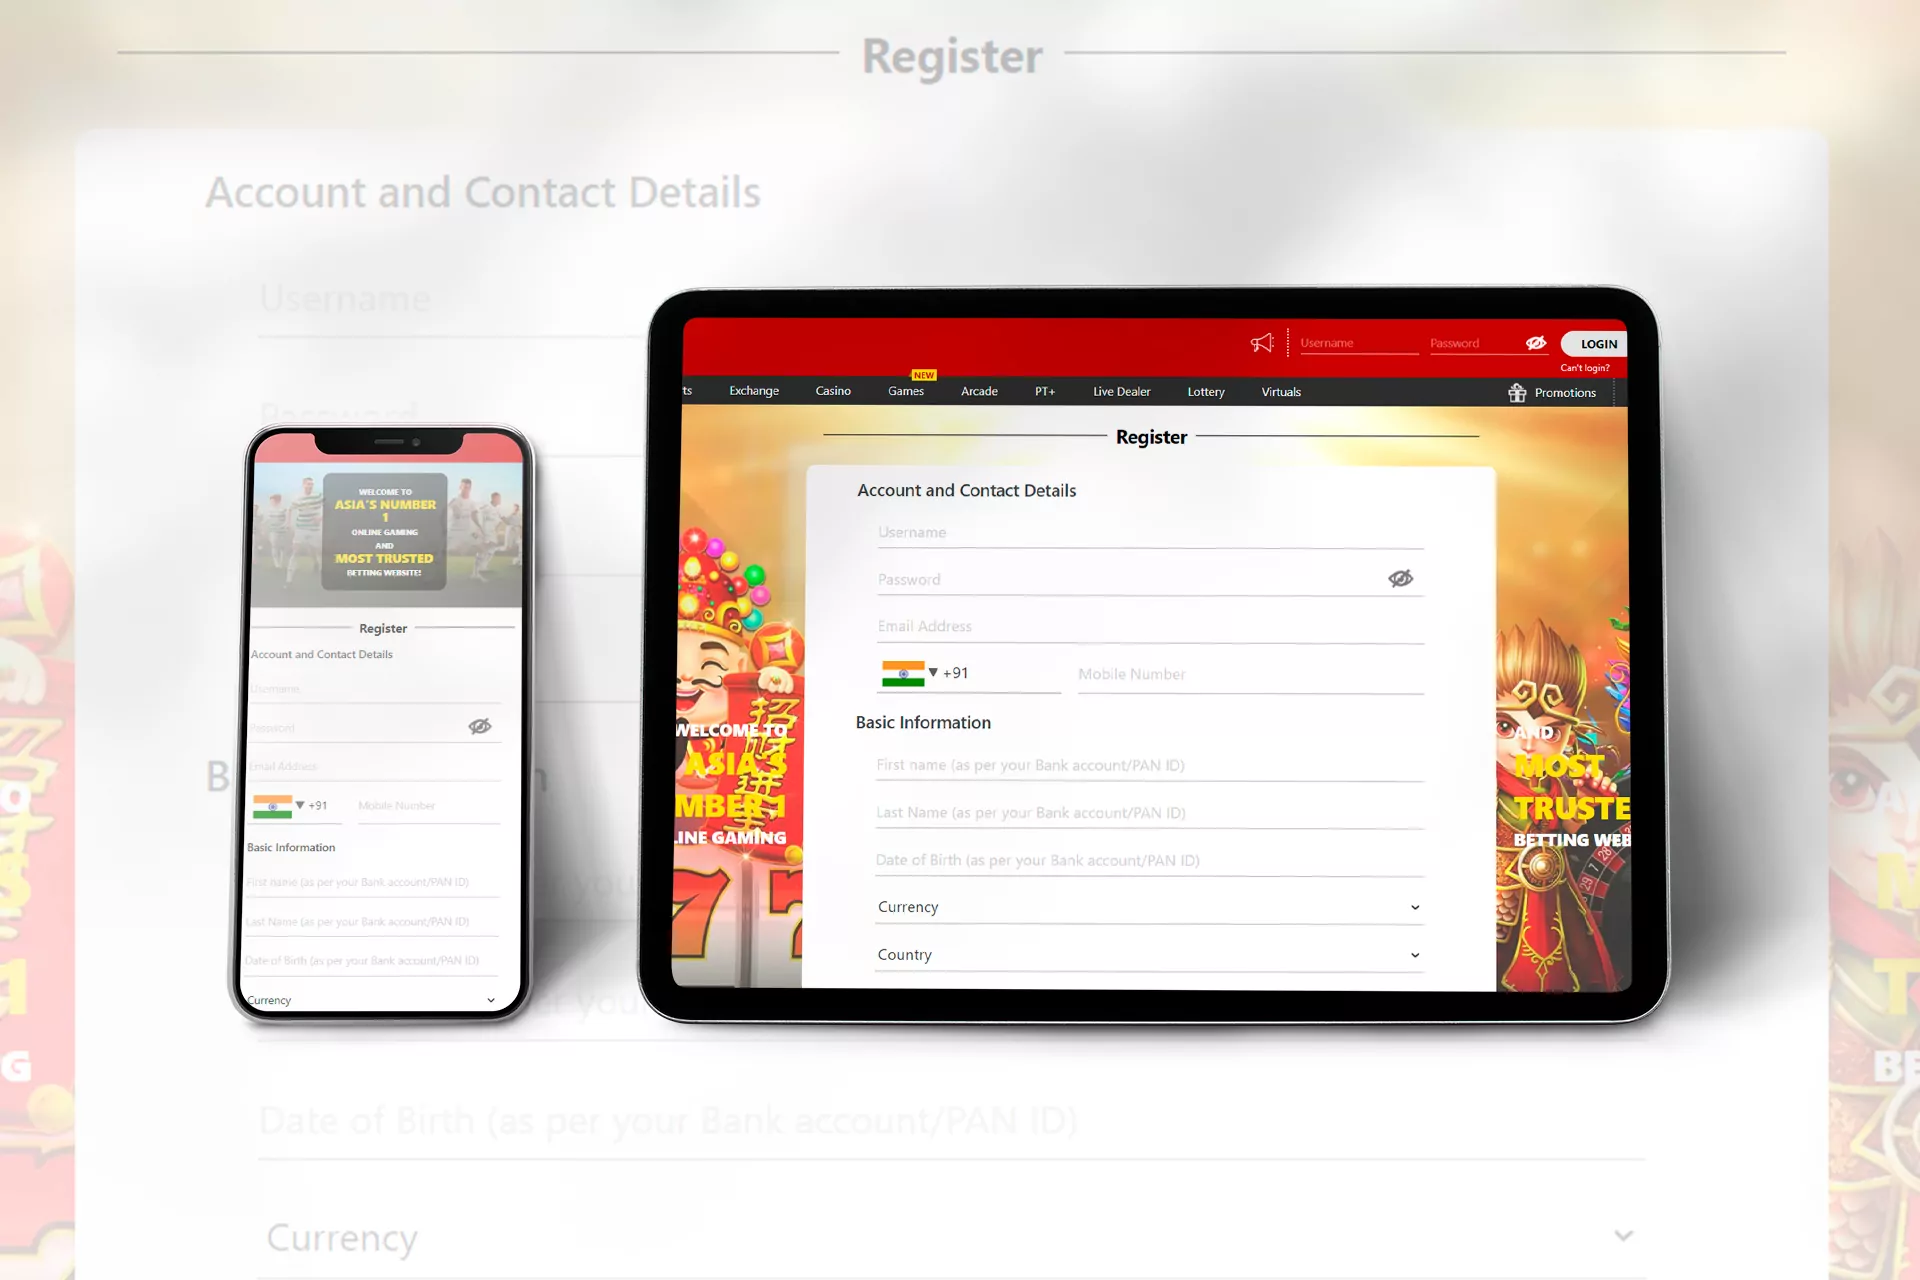 You can easily register in Dafabet via your mobile phone or tablet.